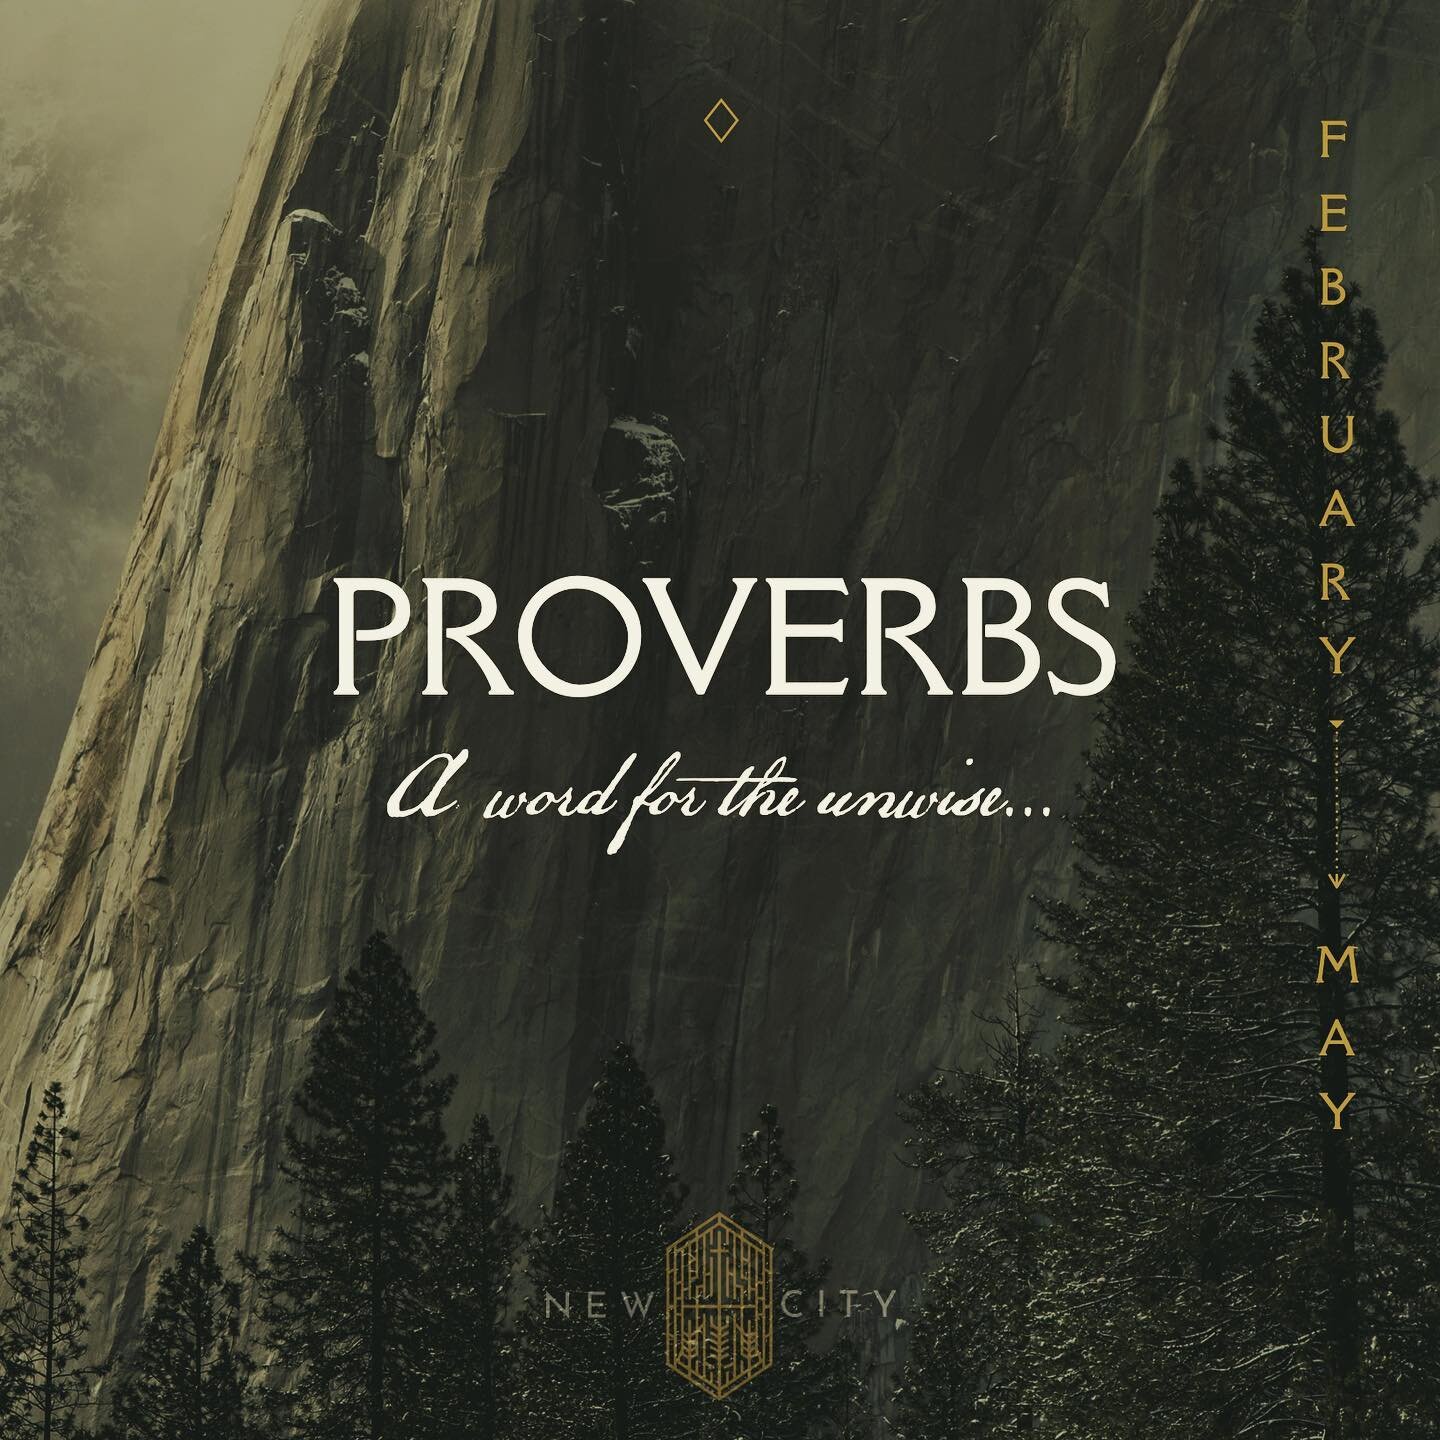 We&rsquo;re starting a new series in Proverbs this Sunday. If you&rsquo;re looking for a home Church, you&rsquo;re welcome to explore, engage and embody the Gospel of Jesus with us. More at www.newcitypres.org